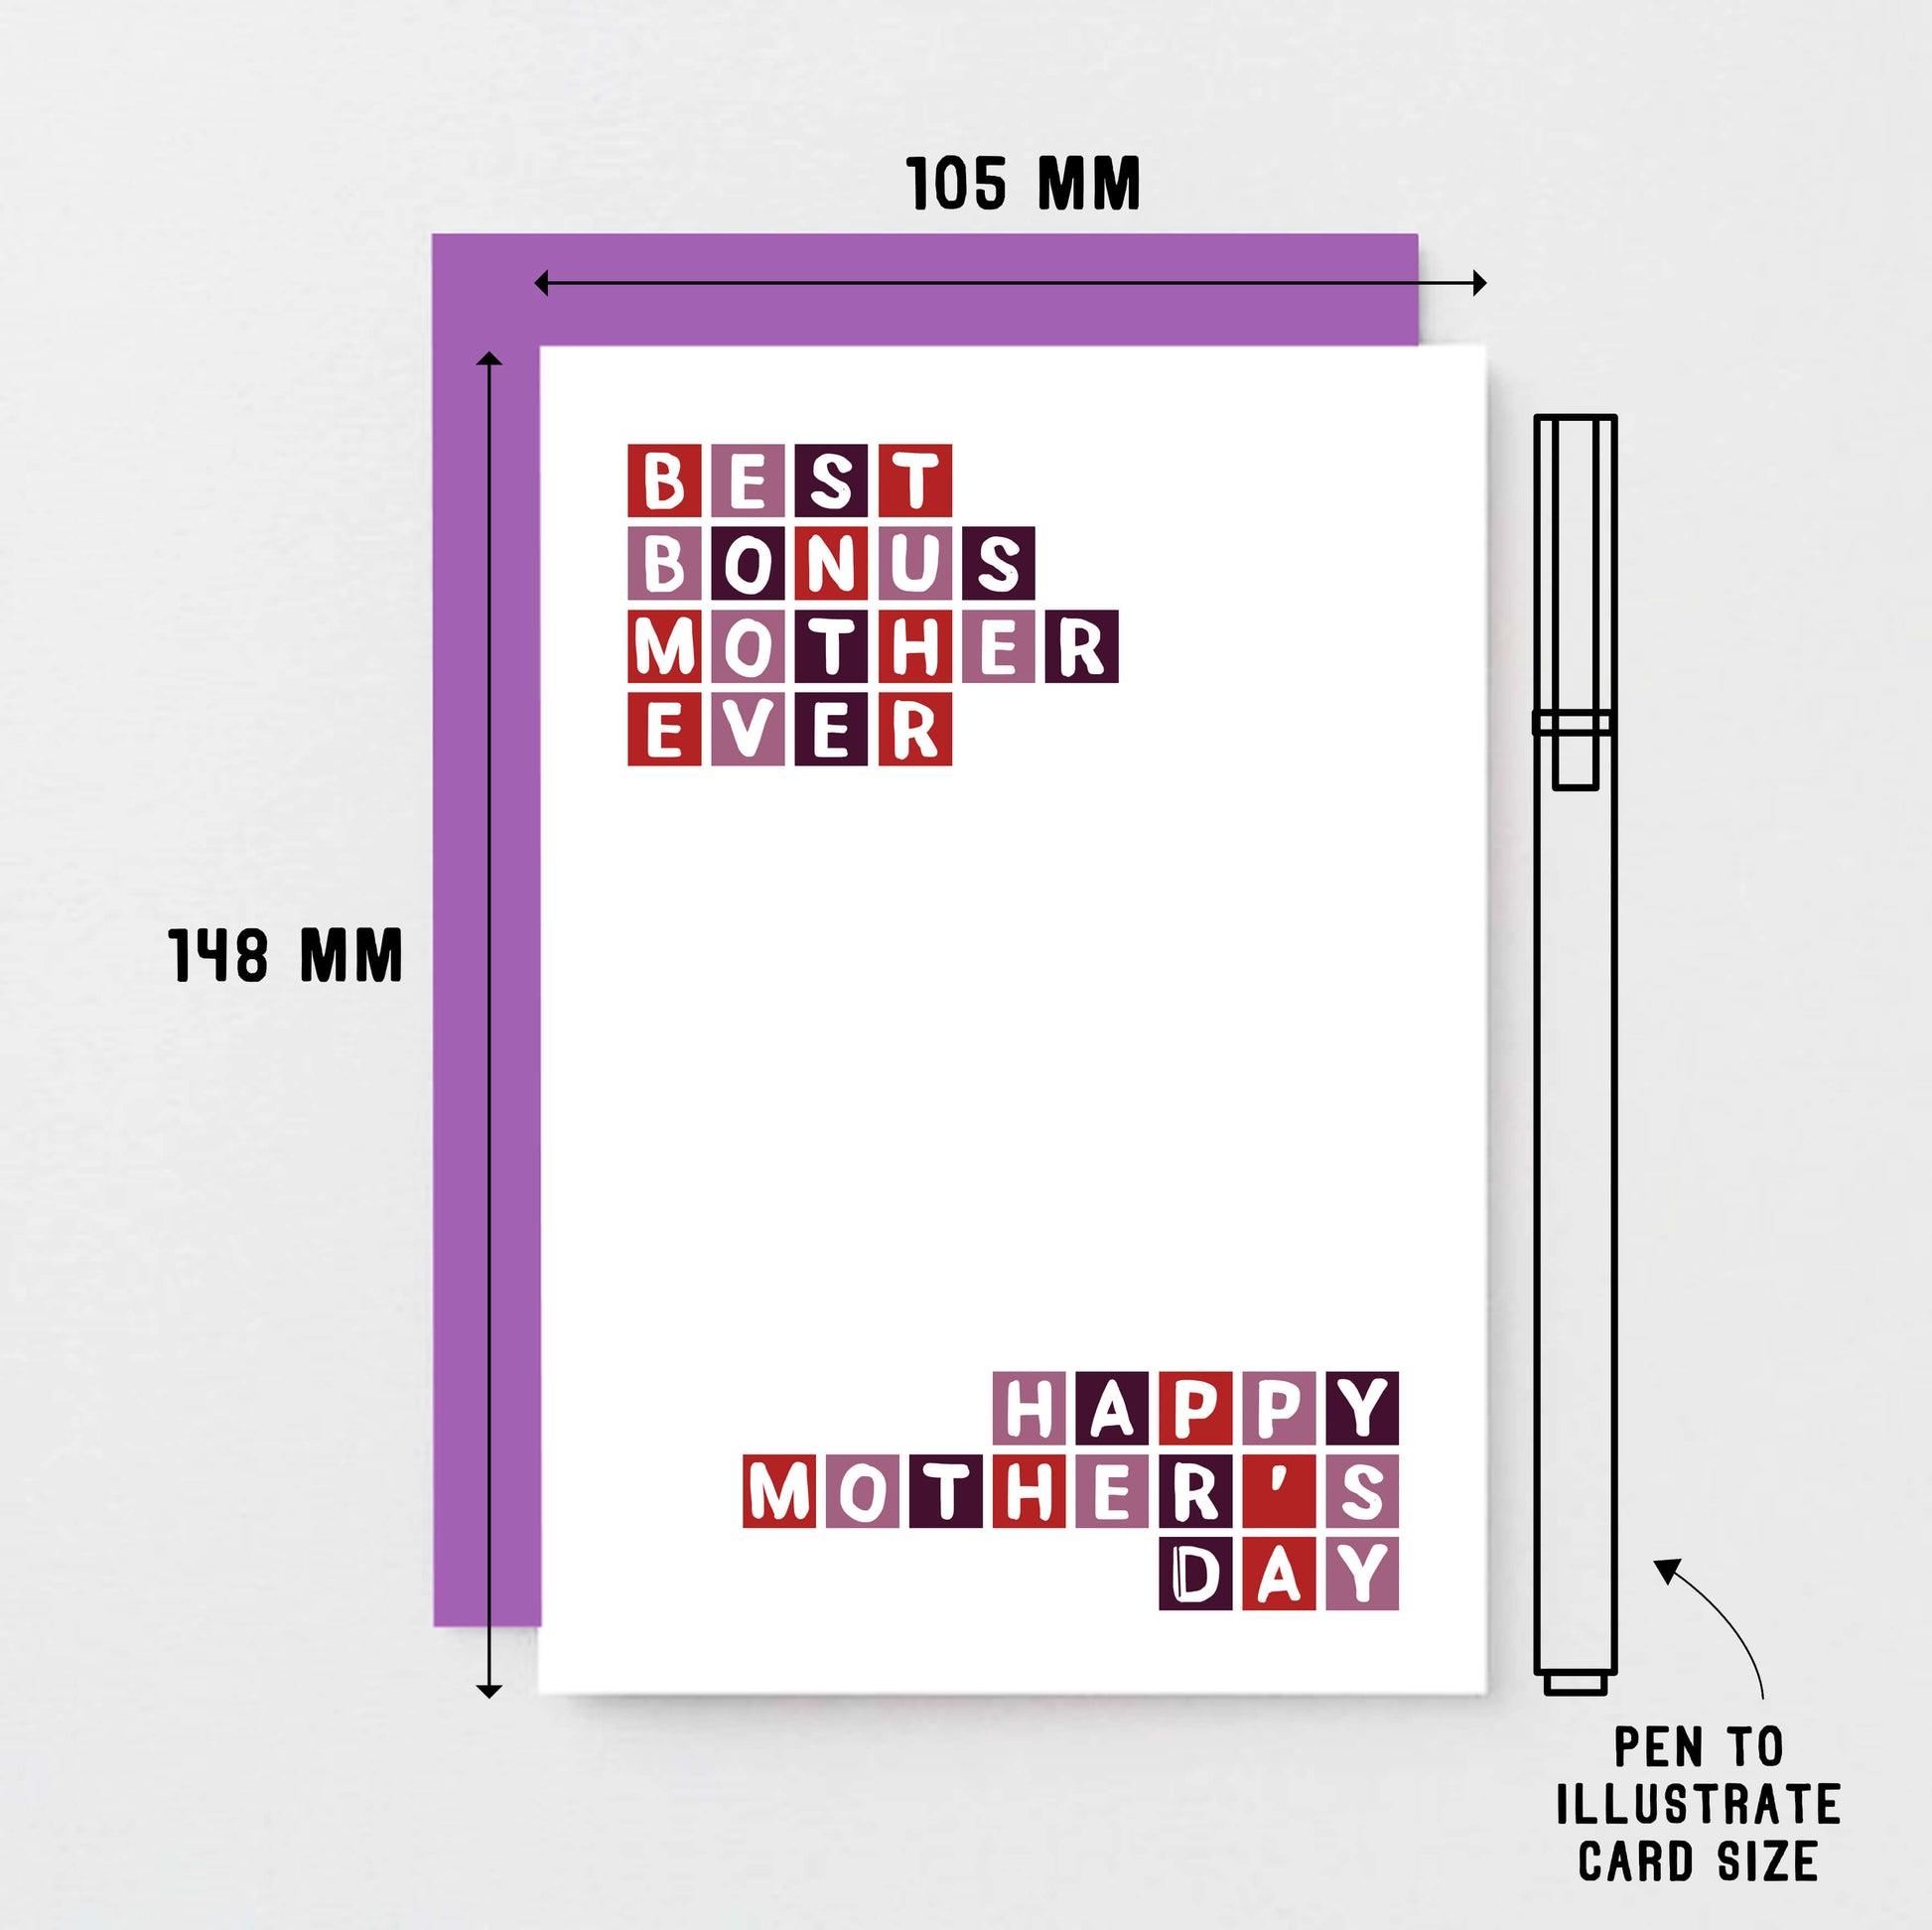 Mother's Day Card by SixElevenCreations. Reads Best Bonust Mother Ever. Happy Mother's Day. Product Code SEM00012A6